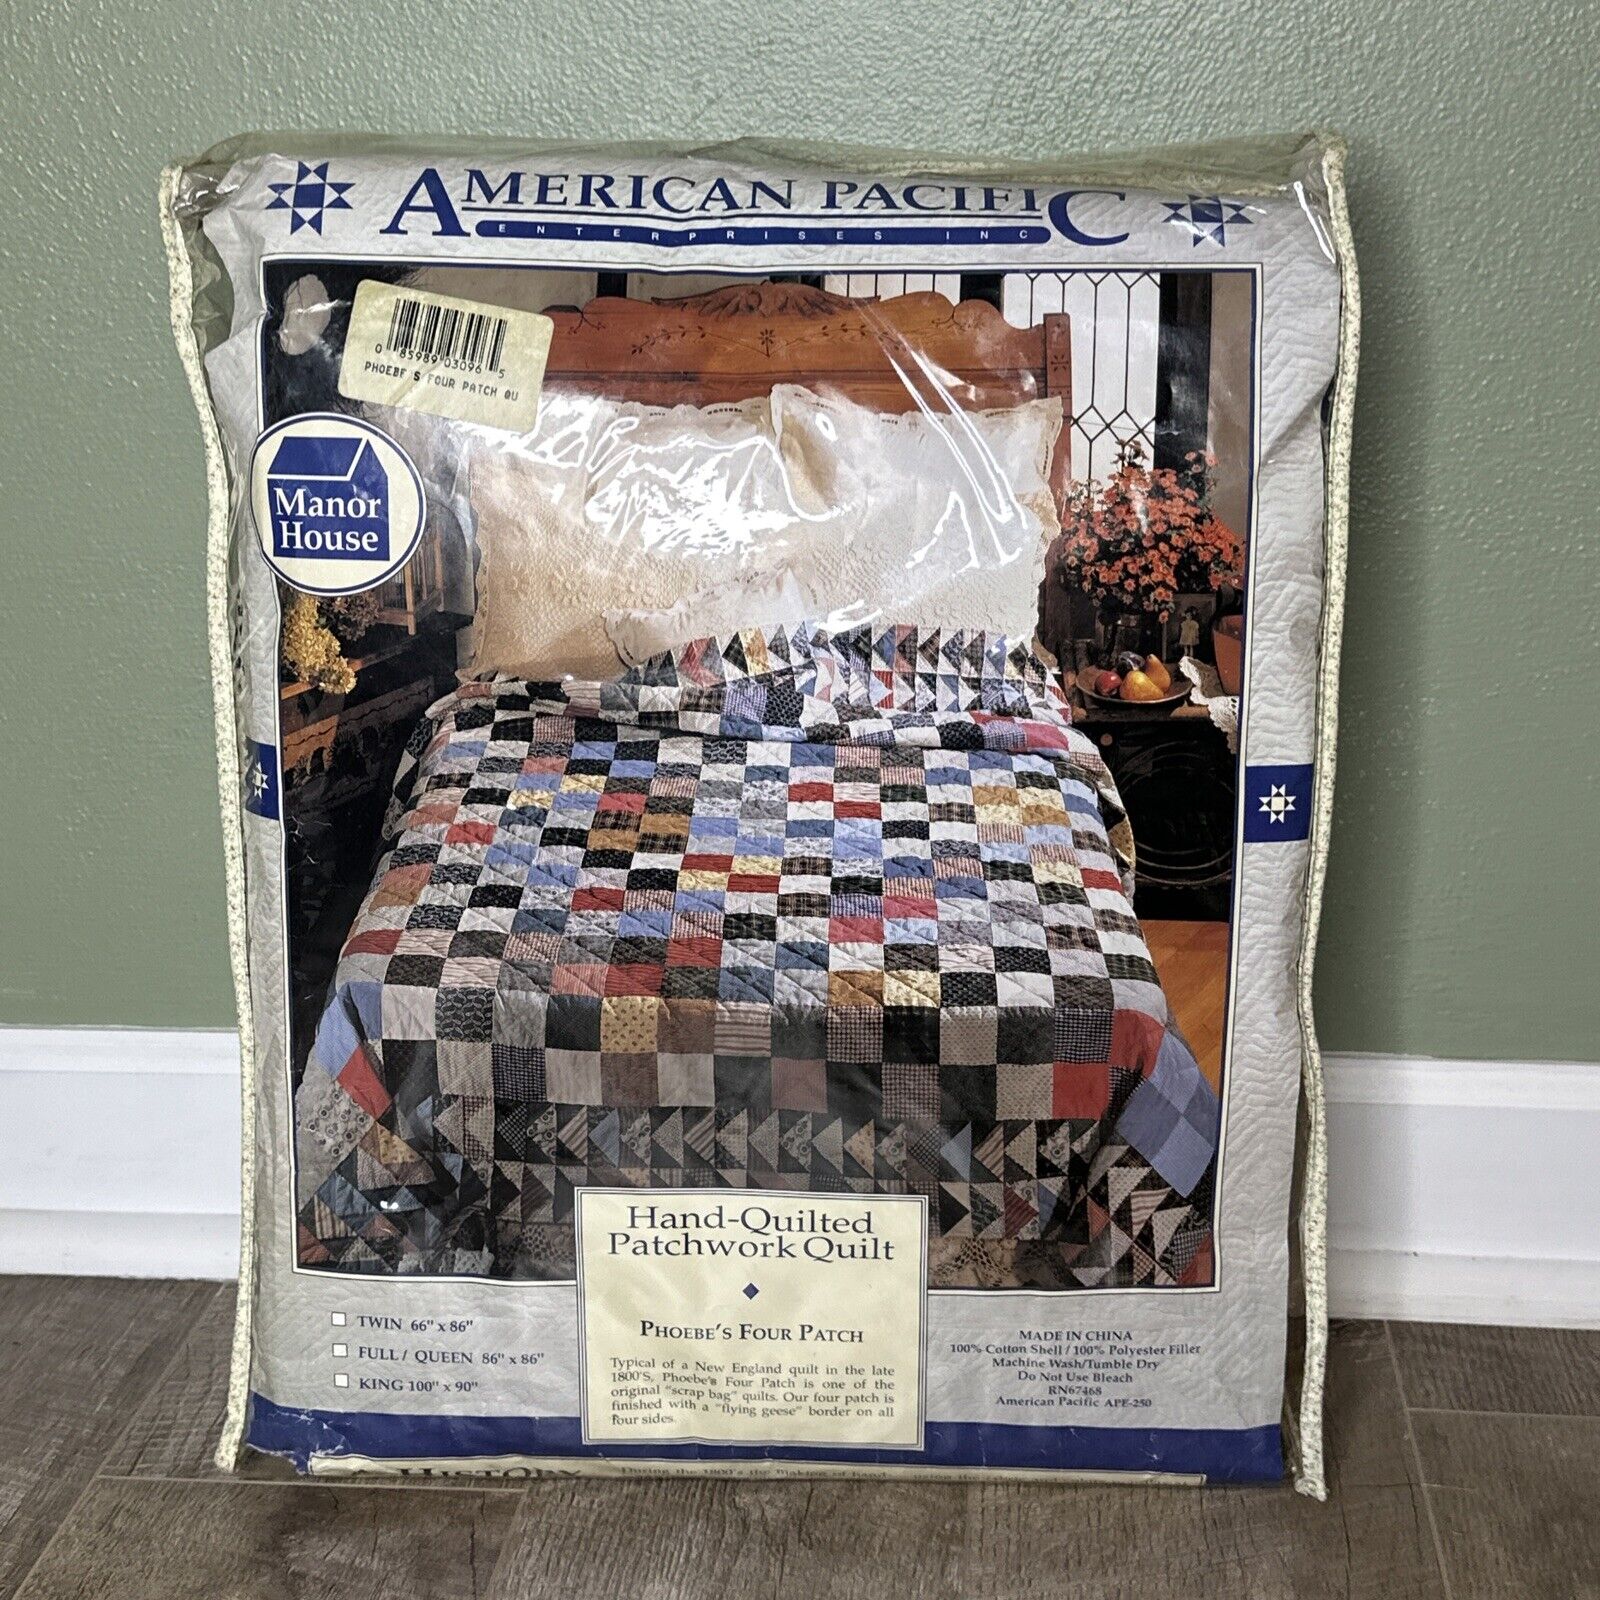 American Pacific Colorful Quilt Bed Cover Pattern Patchwork Full/Queen 86” x 86”